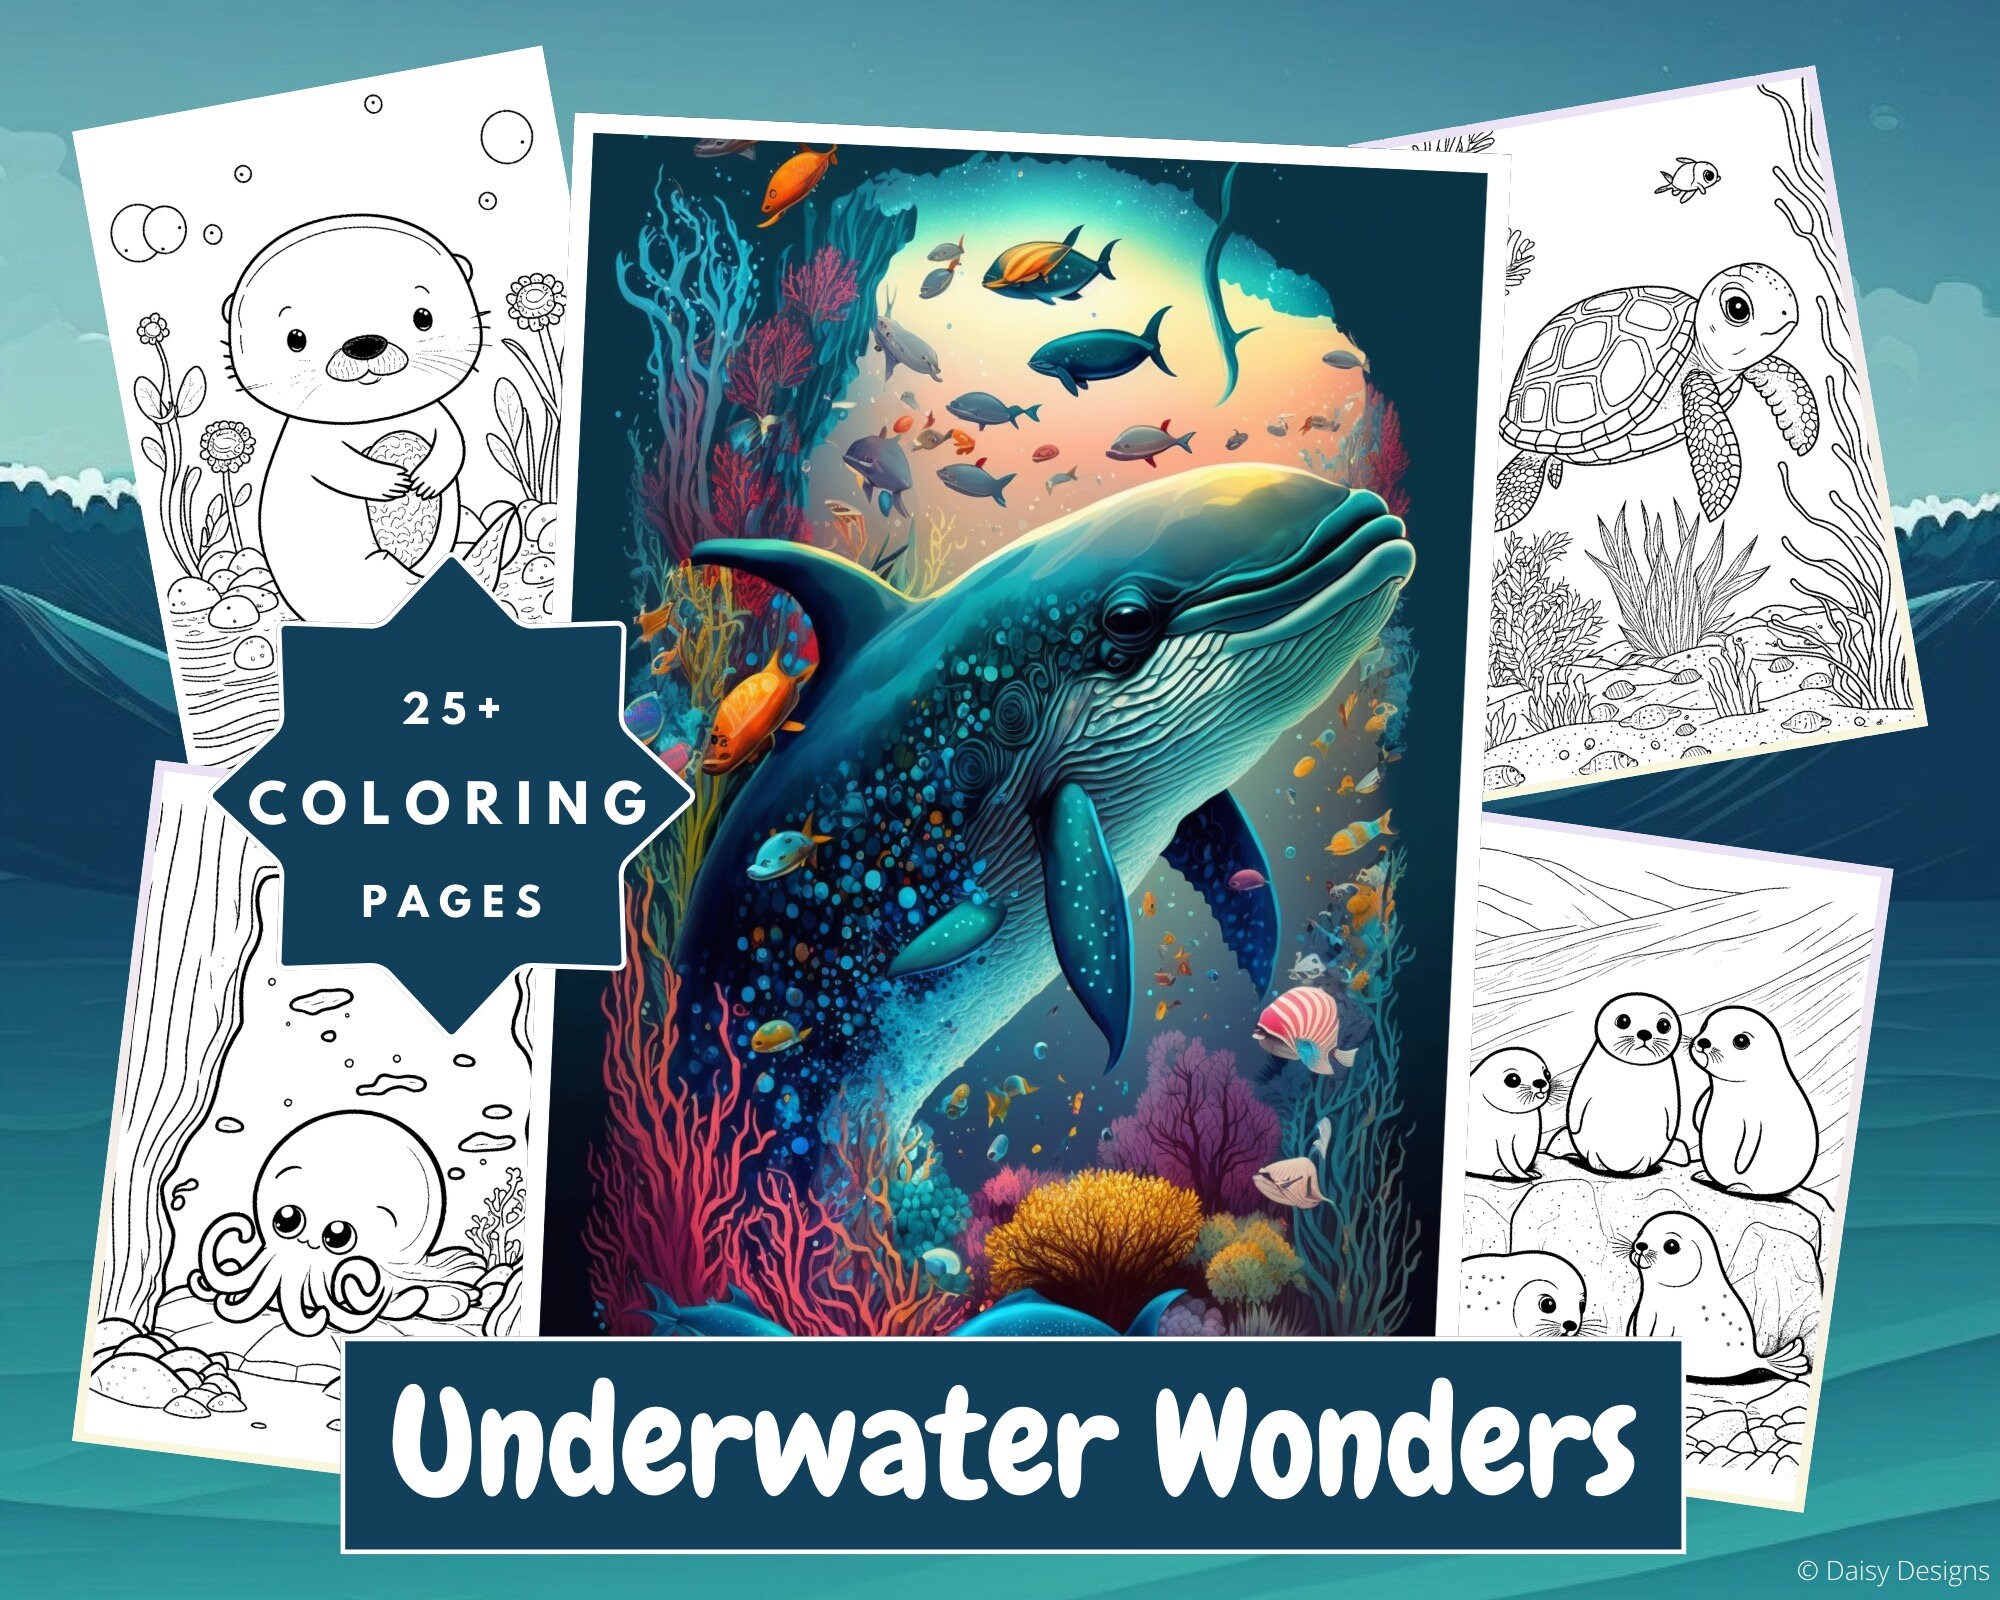 How To Draw Book For Kids: Step By Step Guide For Drawing & Coloring Cute  Ocean Animals Sharks, Seahorse, Starfish, Dolphins & More (Paperback)